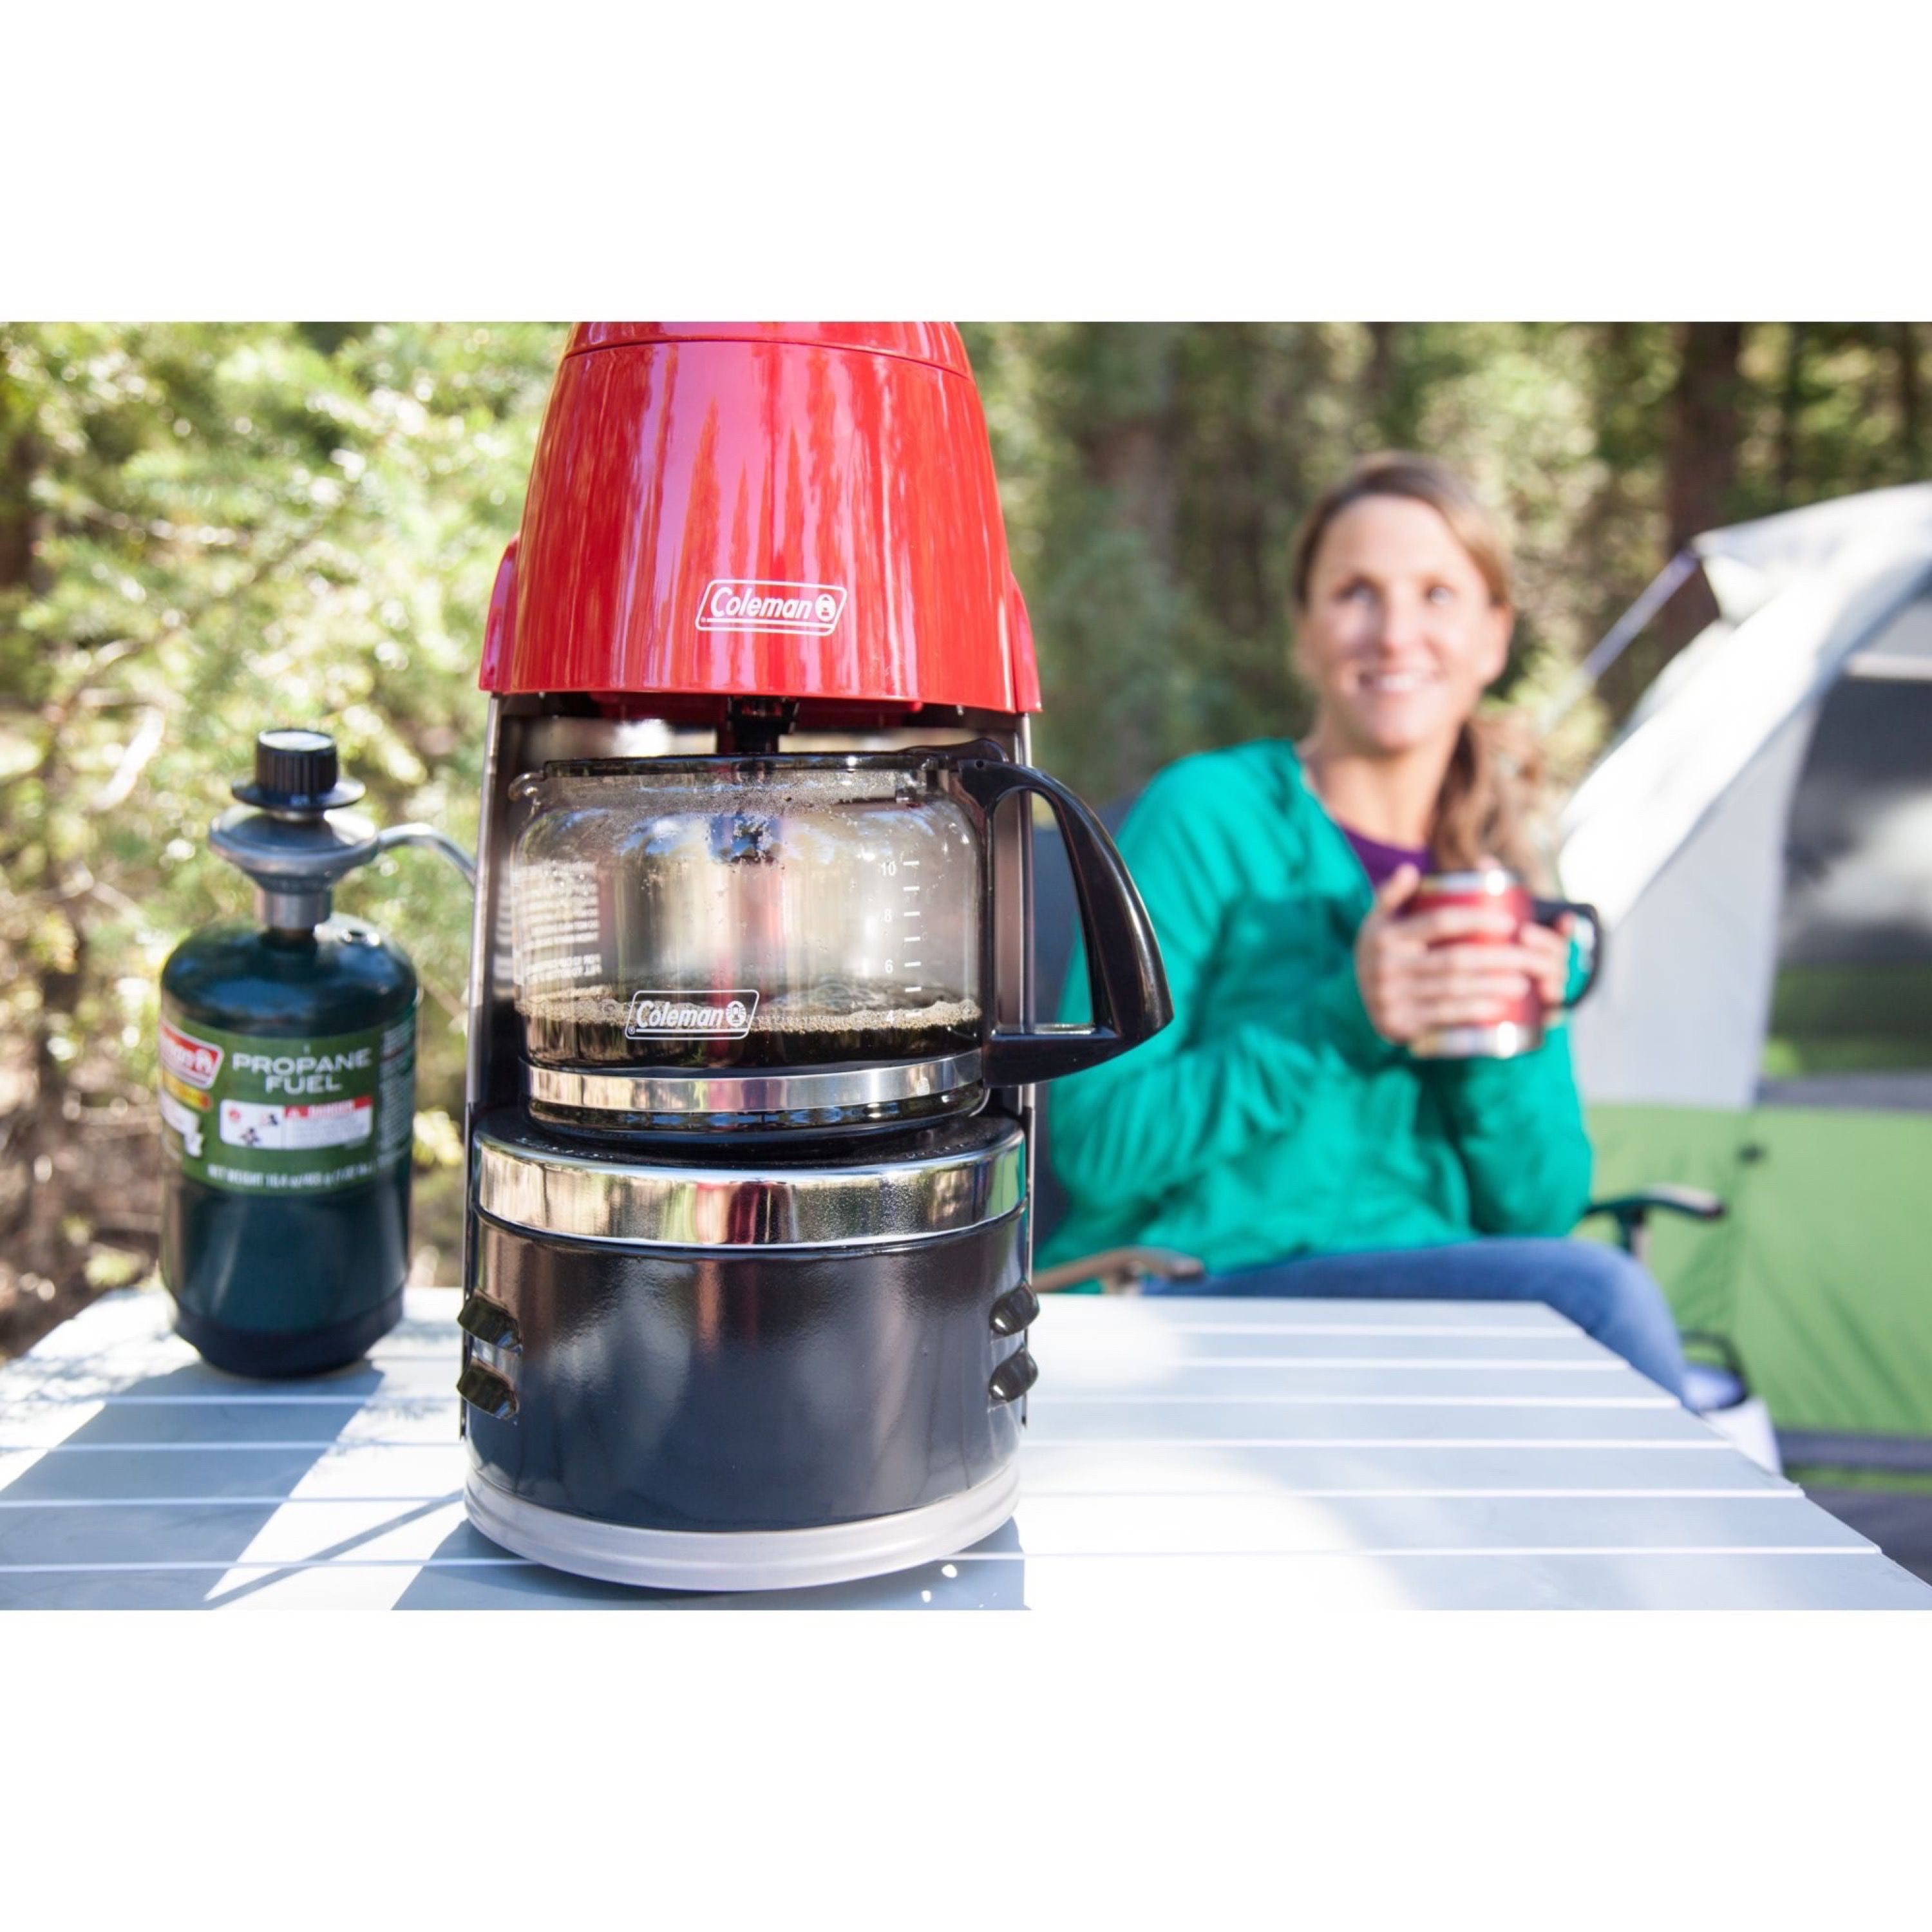 New Coleman Propane Coffee Maker for Sale in Battery Park, VA - OfferUp